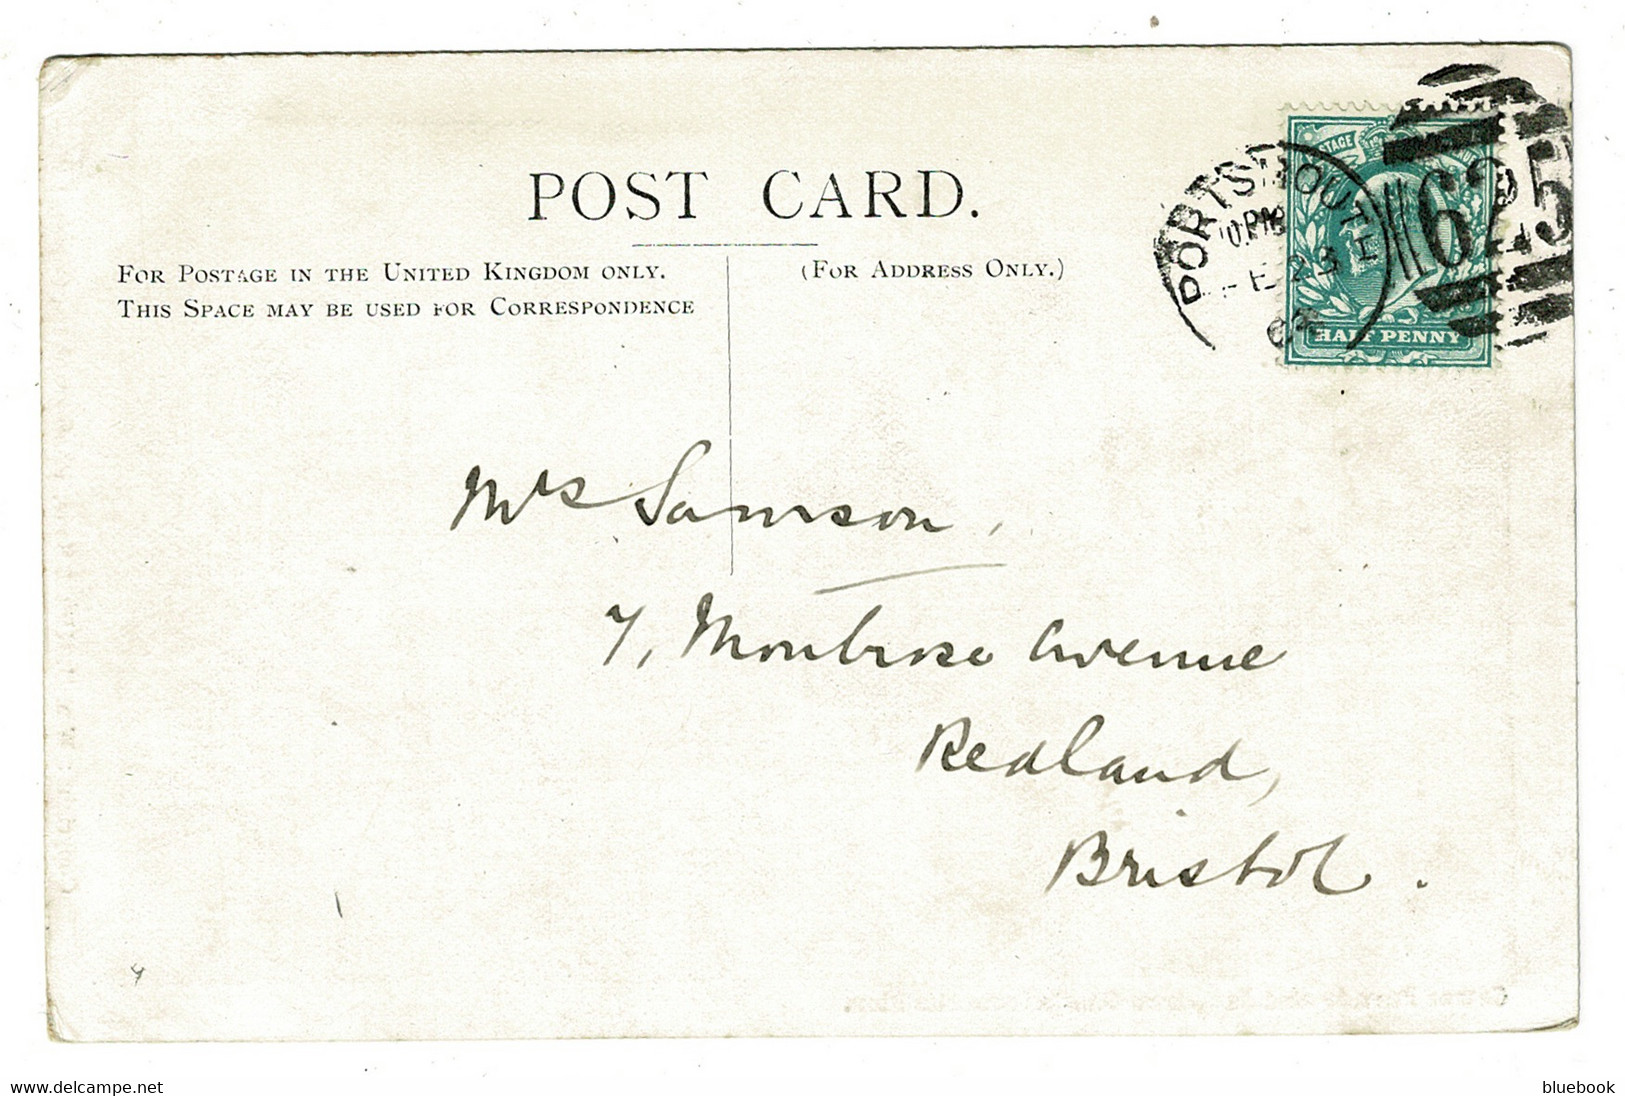 Ref 1502 - 1904 Postcard - Cowes & Squadron Castle - Isle Of Wight - Portsmouth Duplex Postmark - Cowes